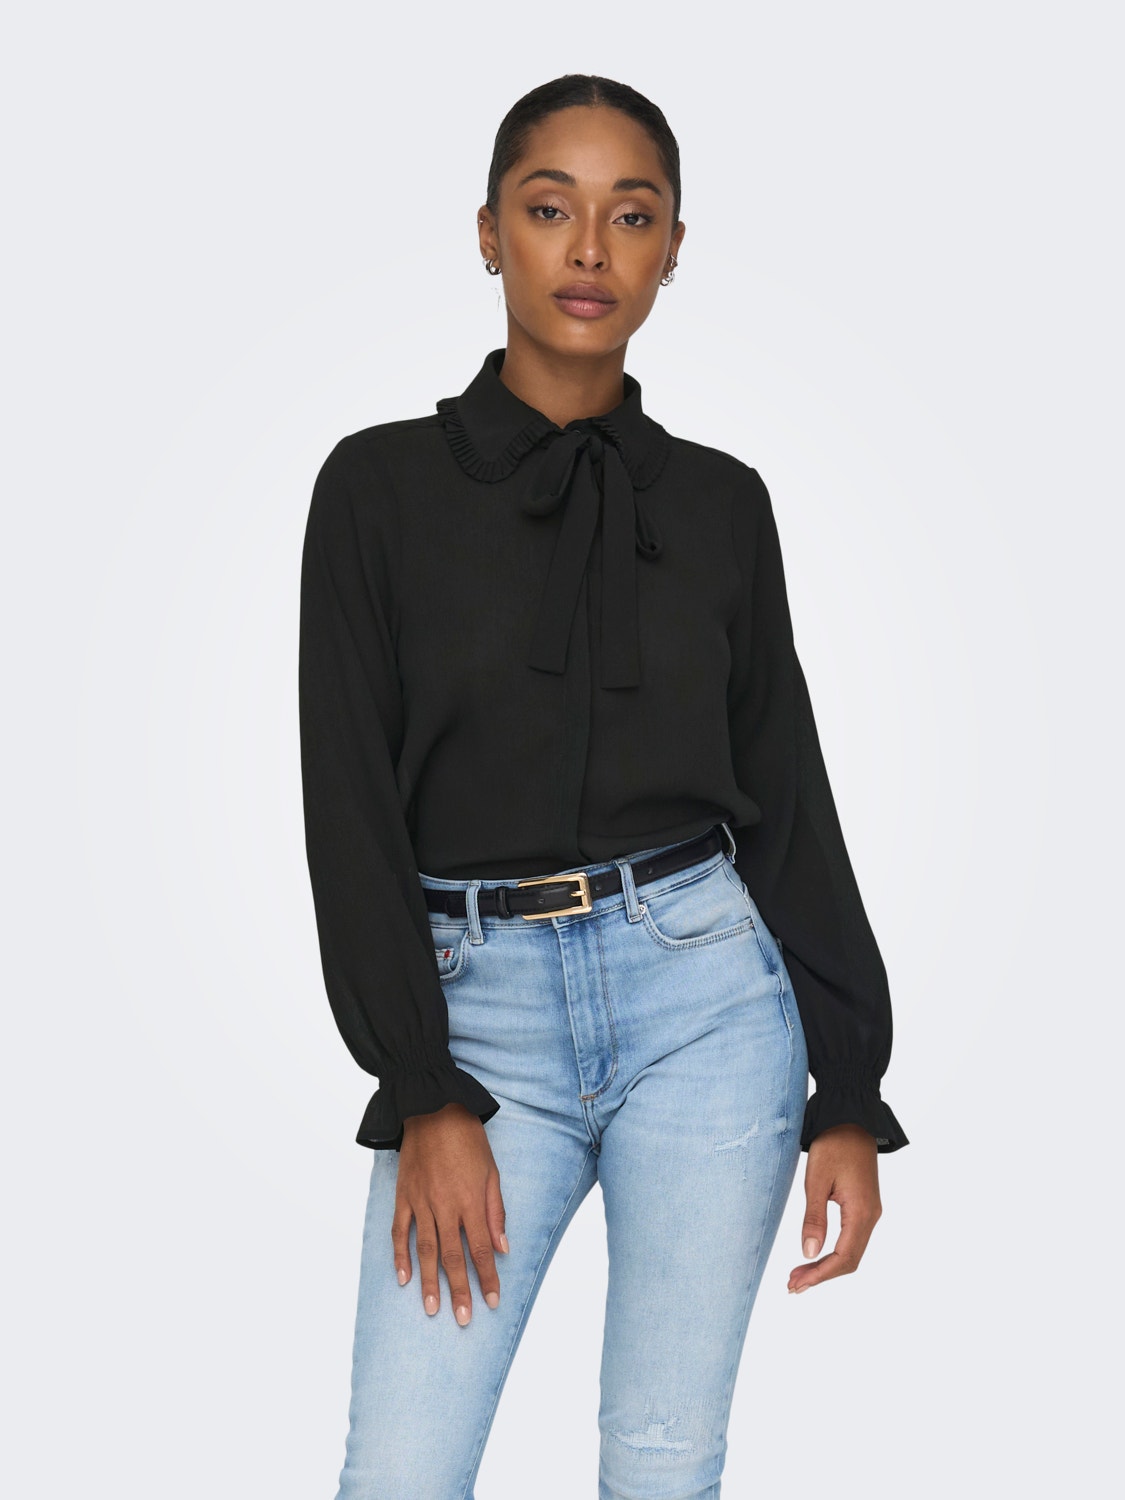 ONLY Shirt With Bow Detail -Black - 15304934